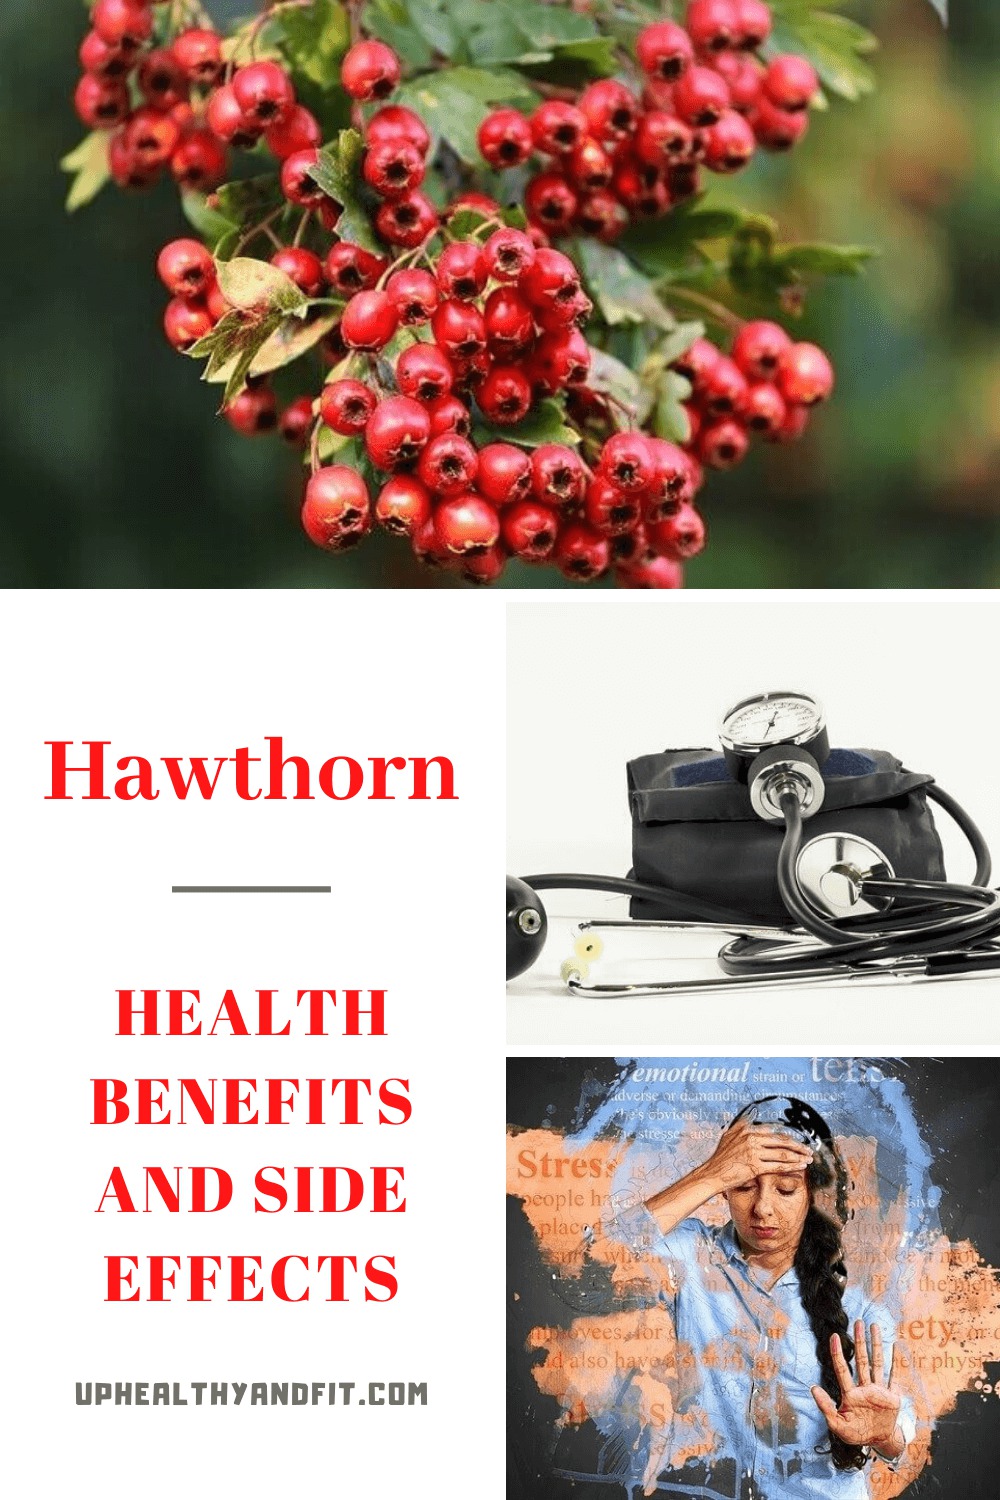 Hawthorn: Health Benefits and Side Effects